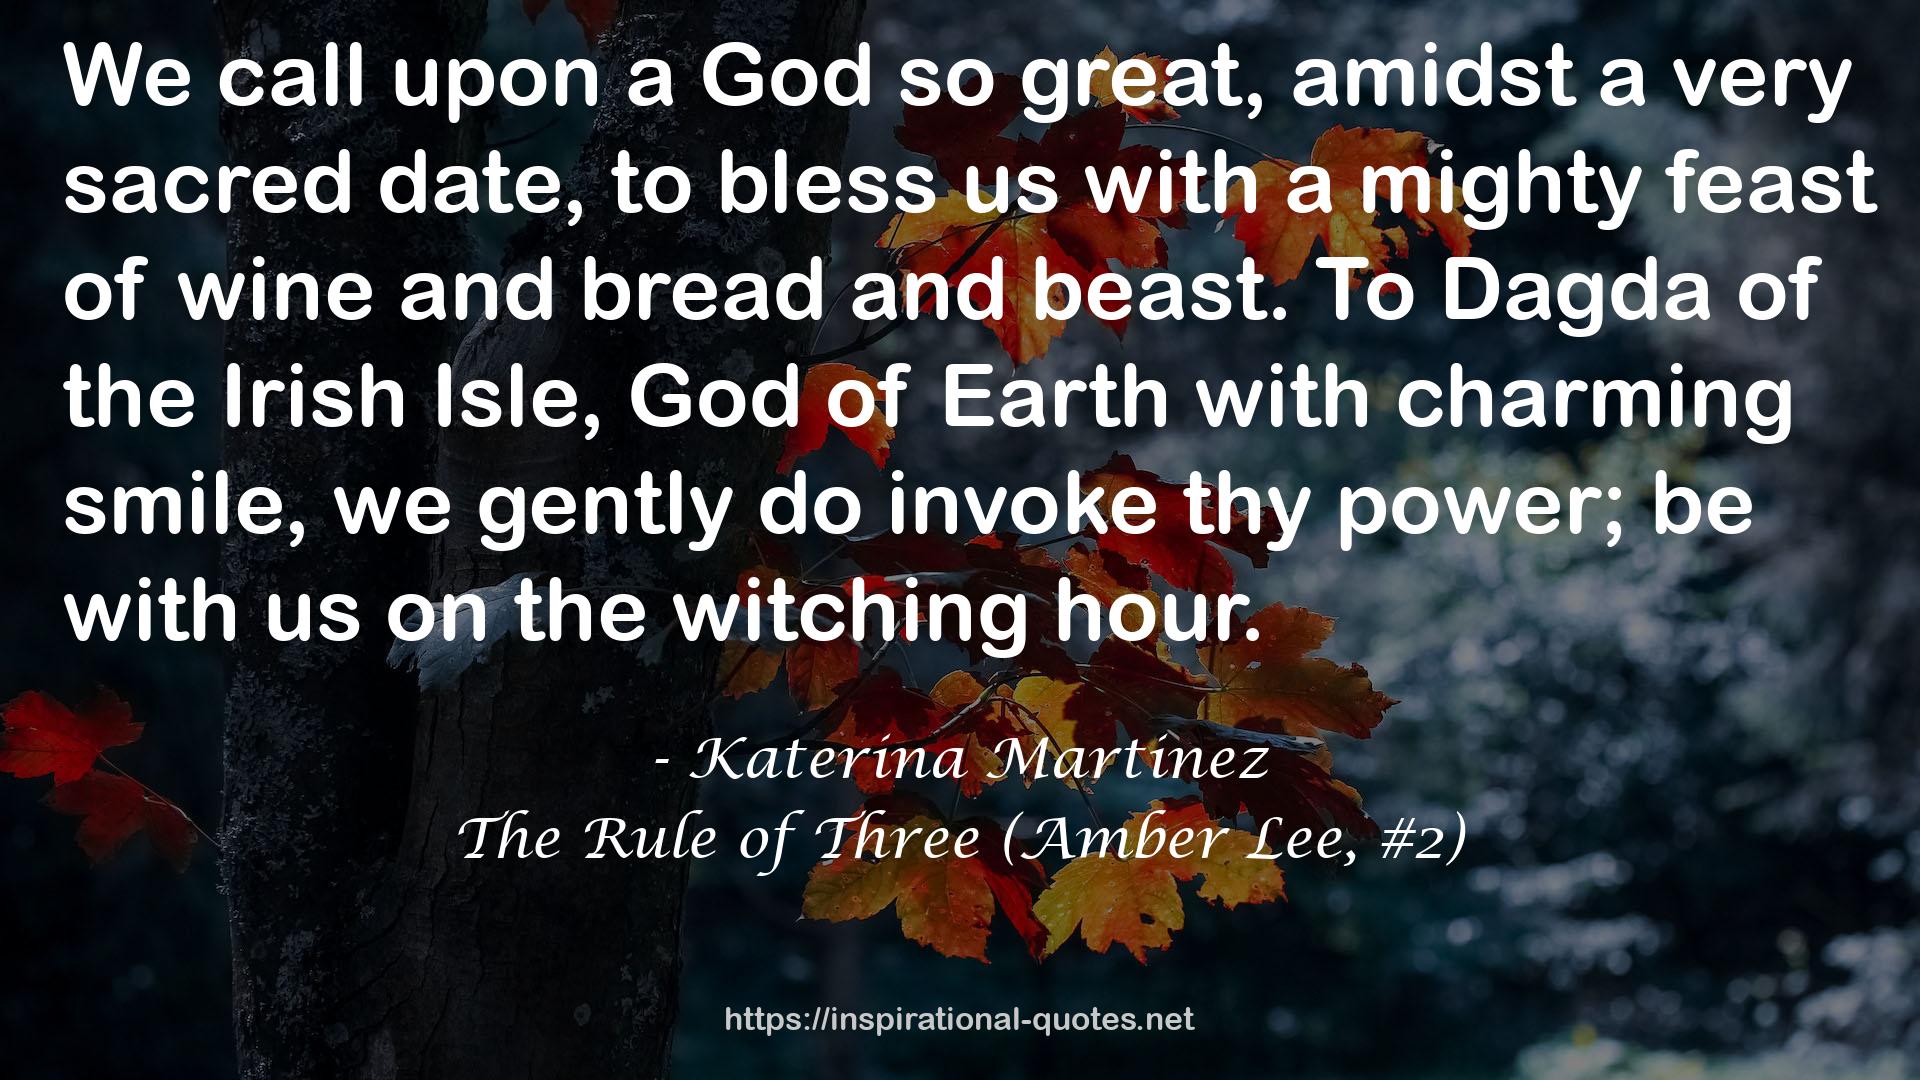 The Rule of Three (Amber Lee, #2) QUOTES